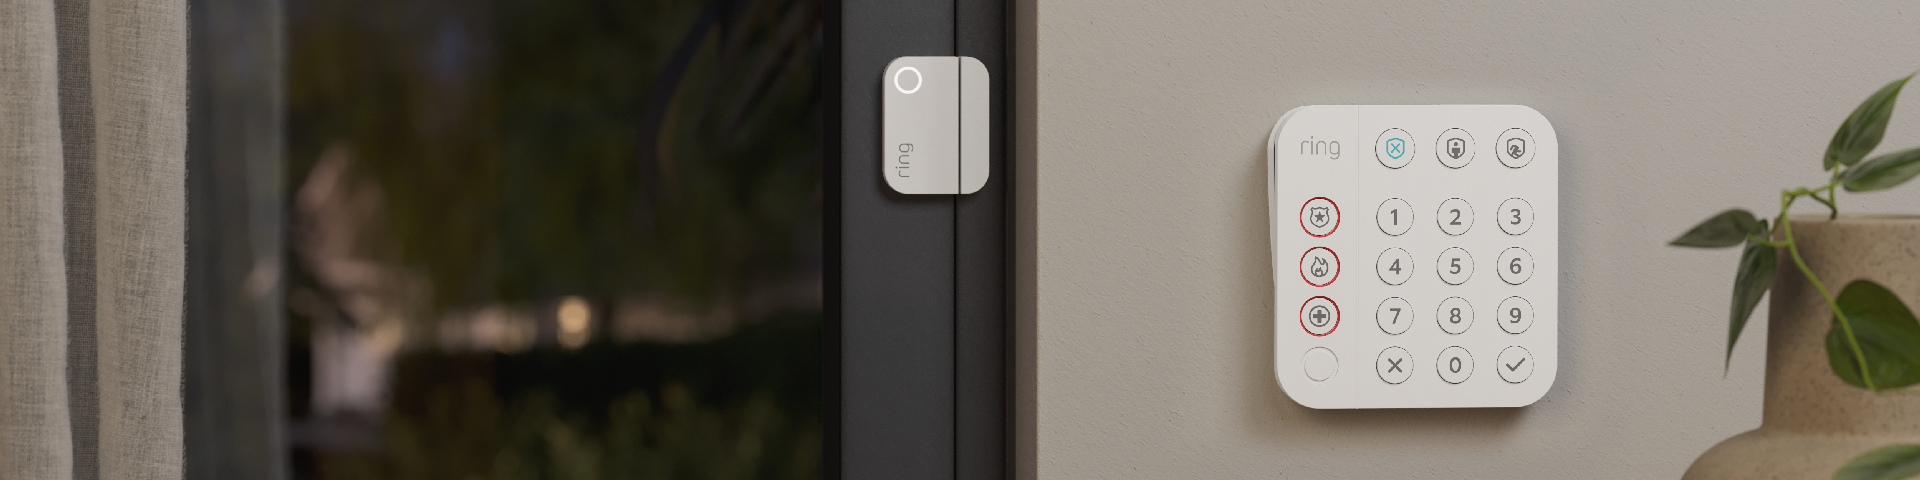 Ring Glass Break Detector review: An essential add-on | TechHive